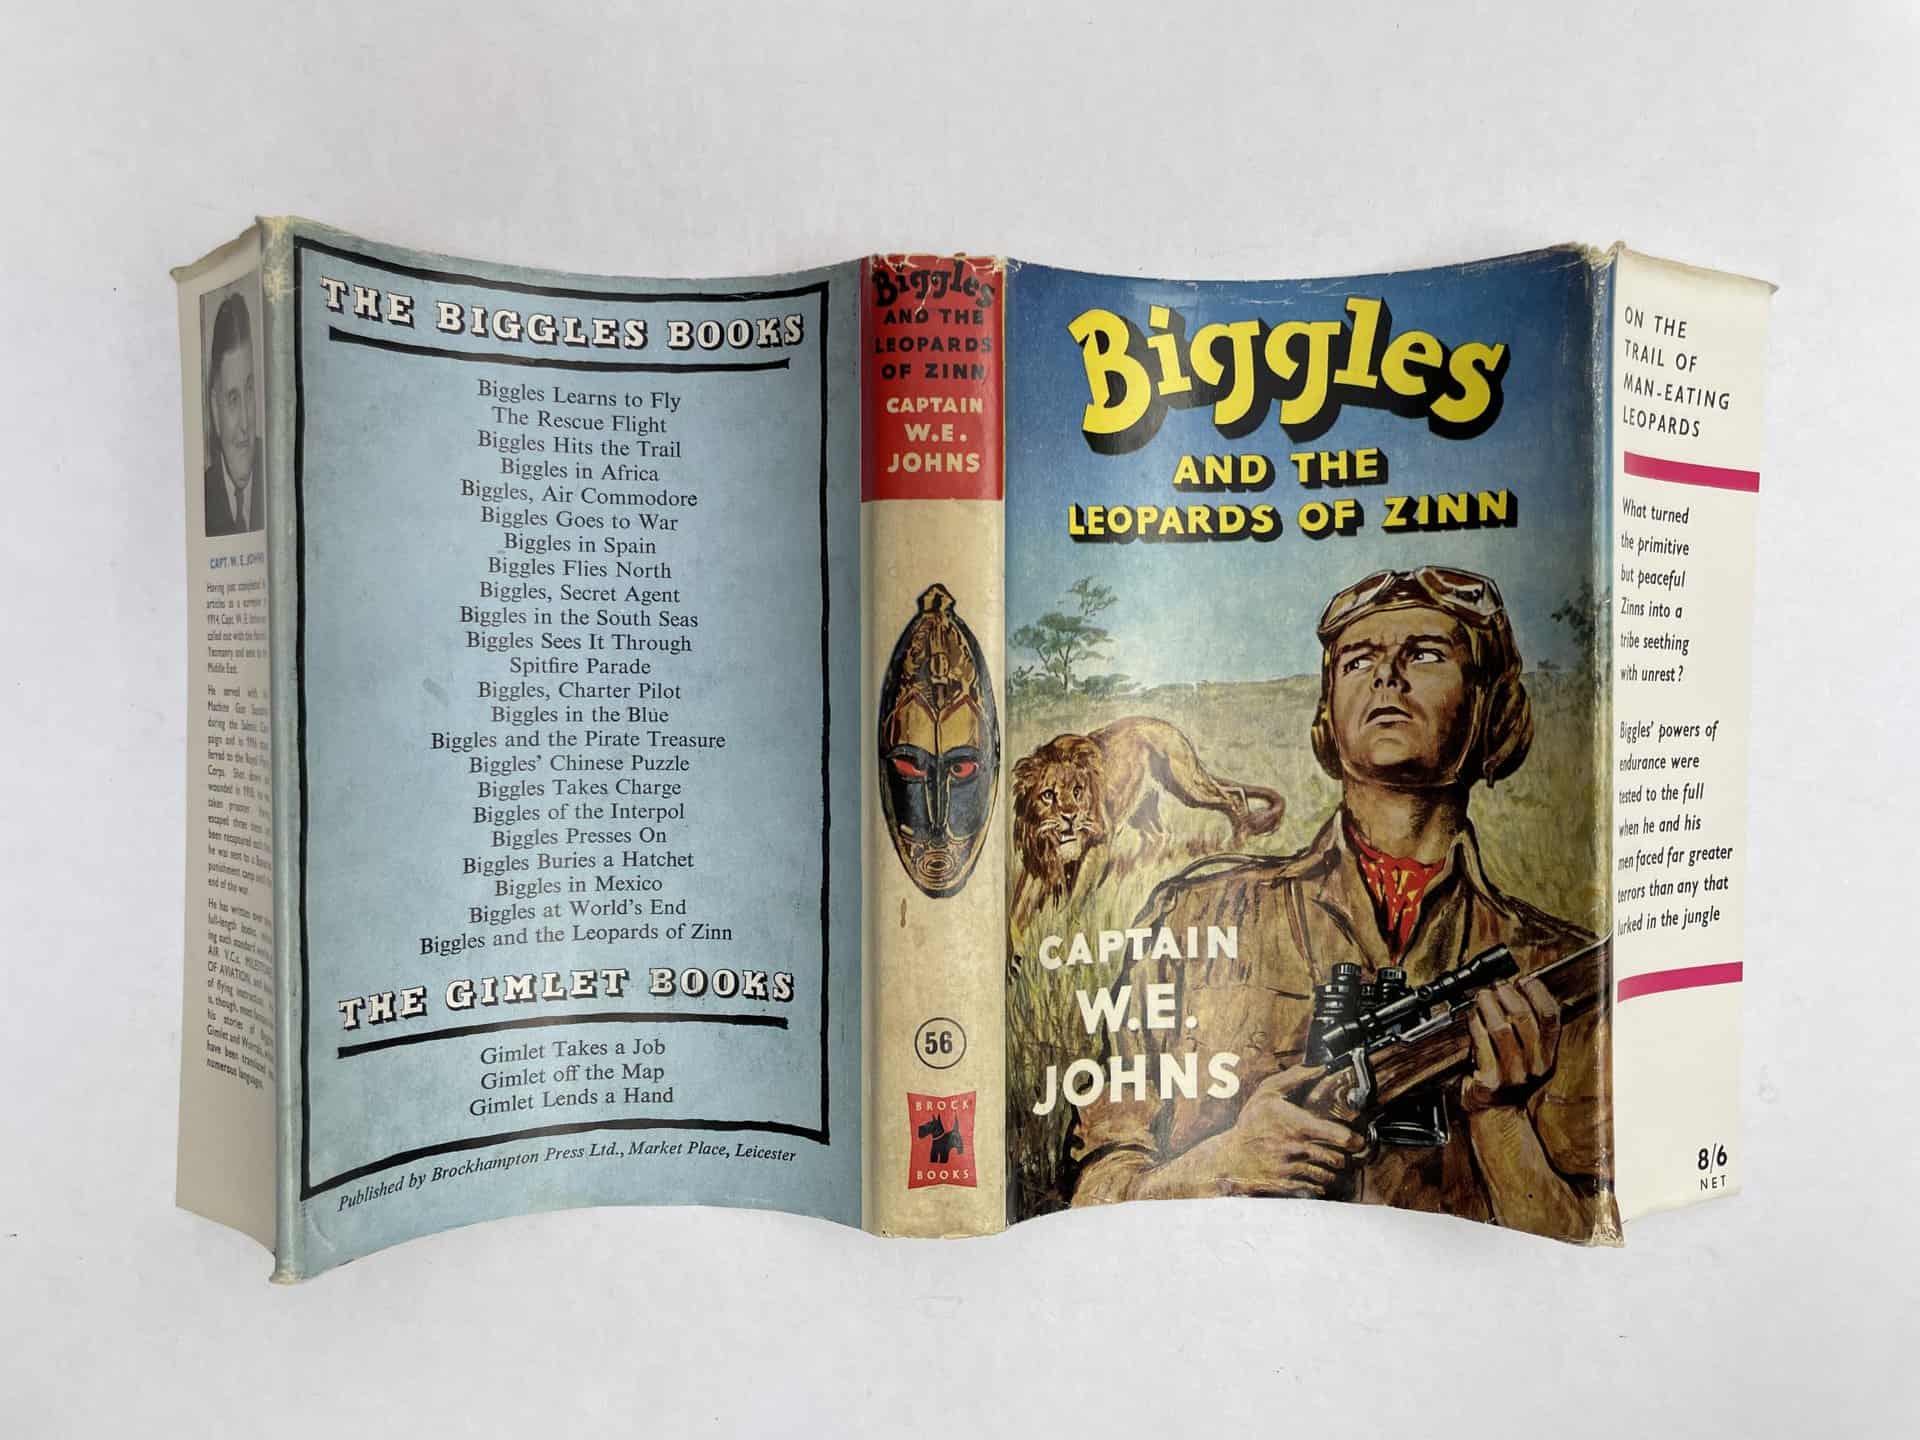 we johns biggles and the leopards of finn first ed4